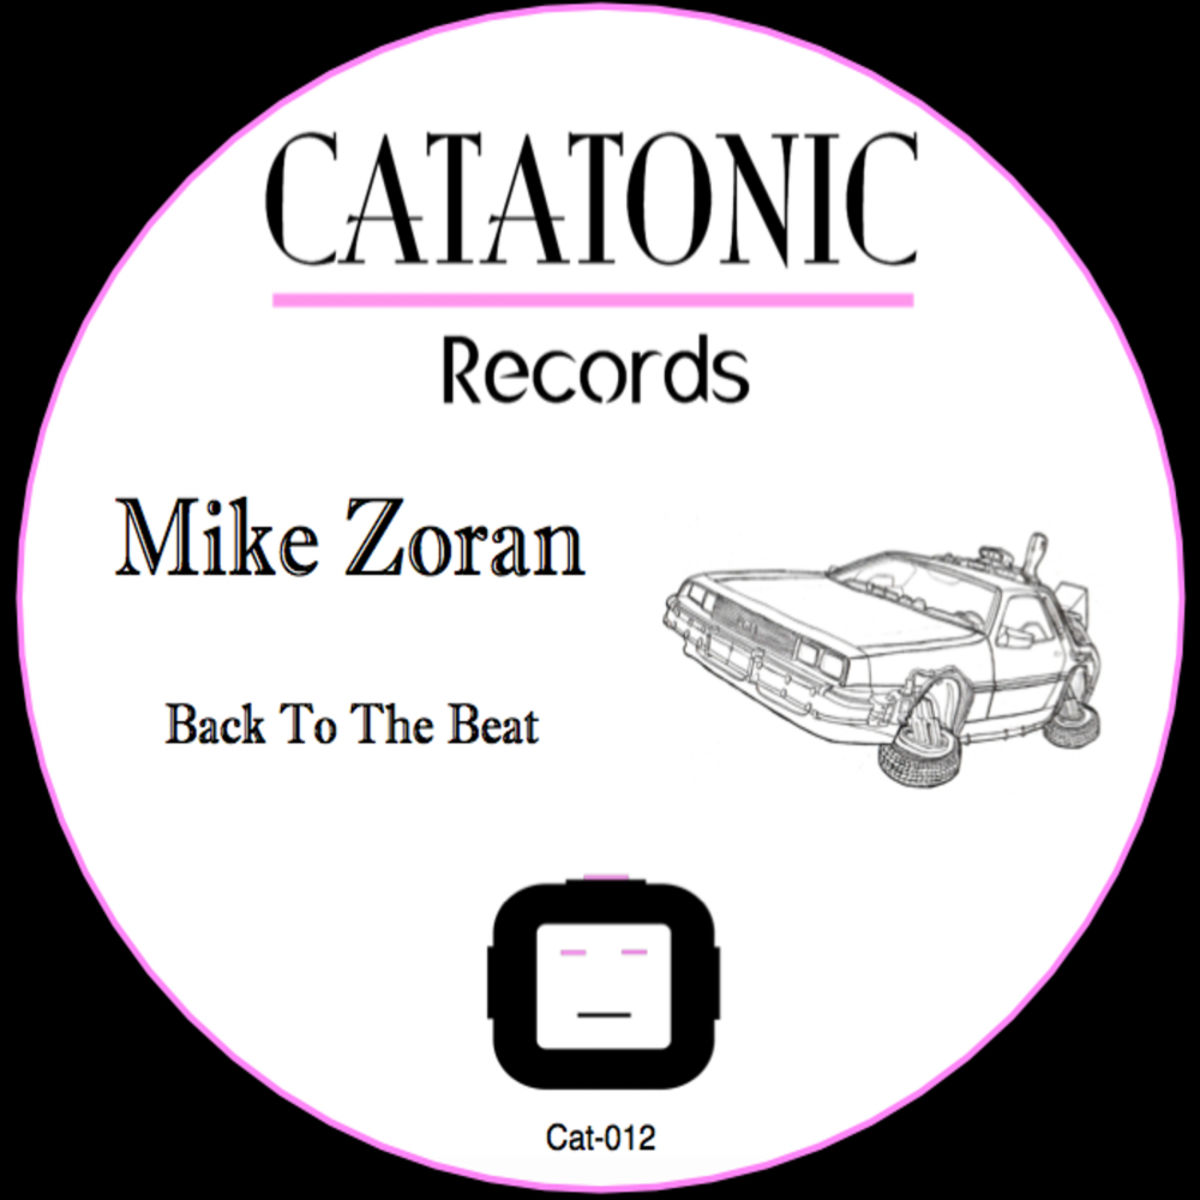 Mike Zoran - Back To The Beat / Catatonic Records